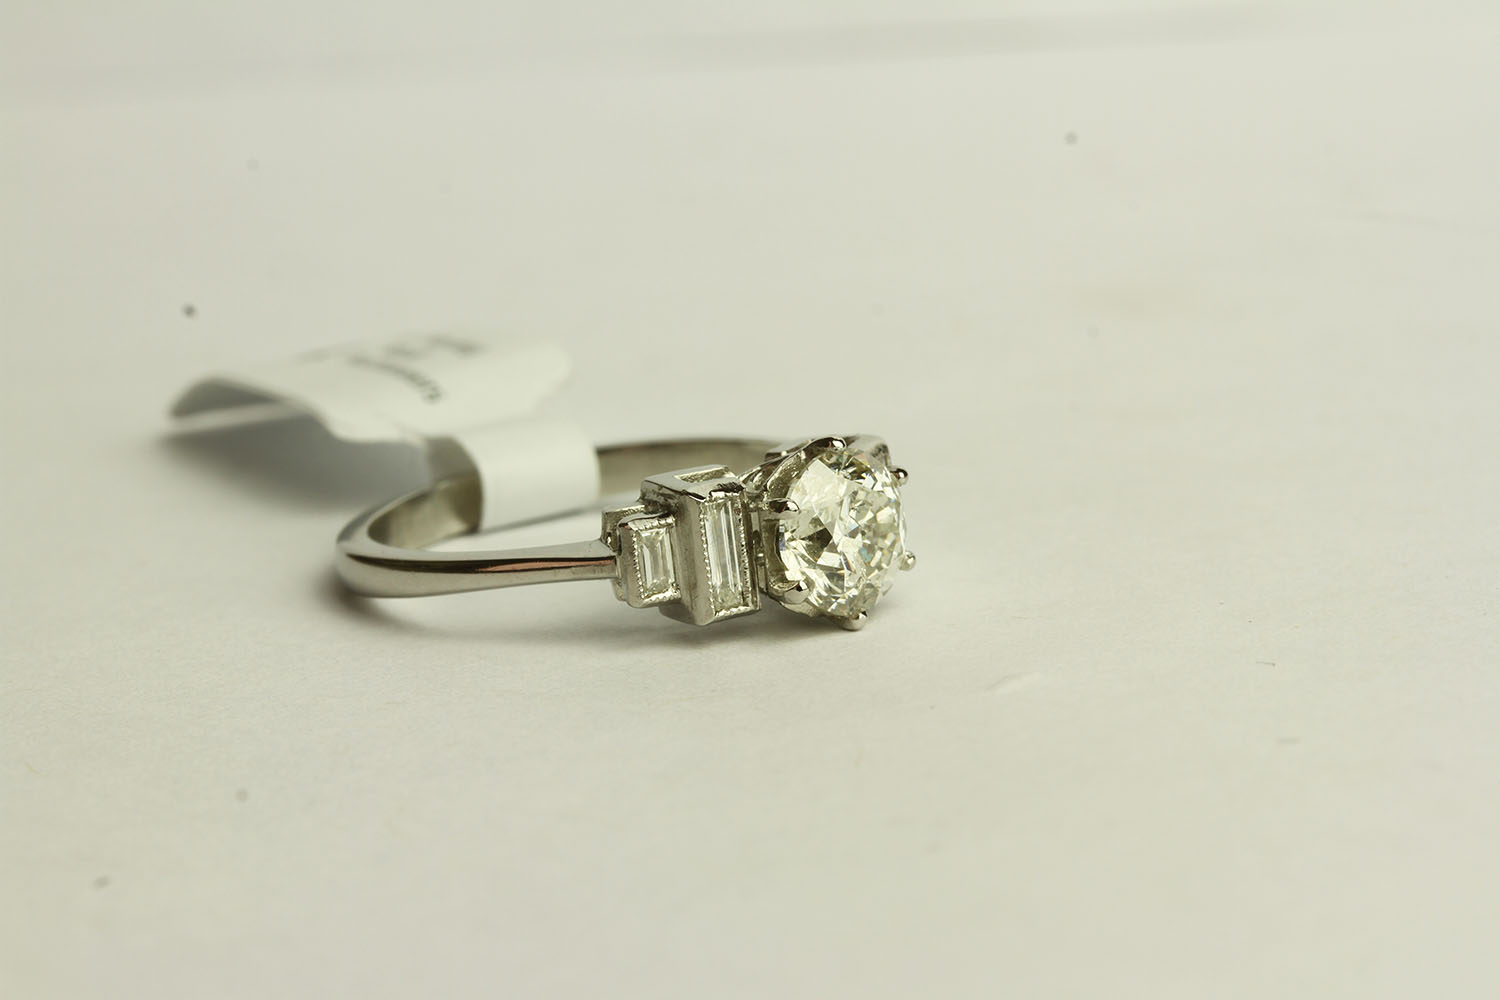 Art Deco Style Diamond Ring, set with 1 old cut diamond approximately 1.02ct, claw set, baguette cut - Image 2 of 3